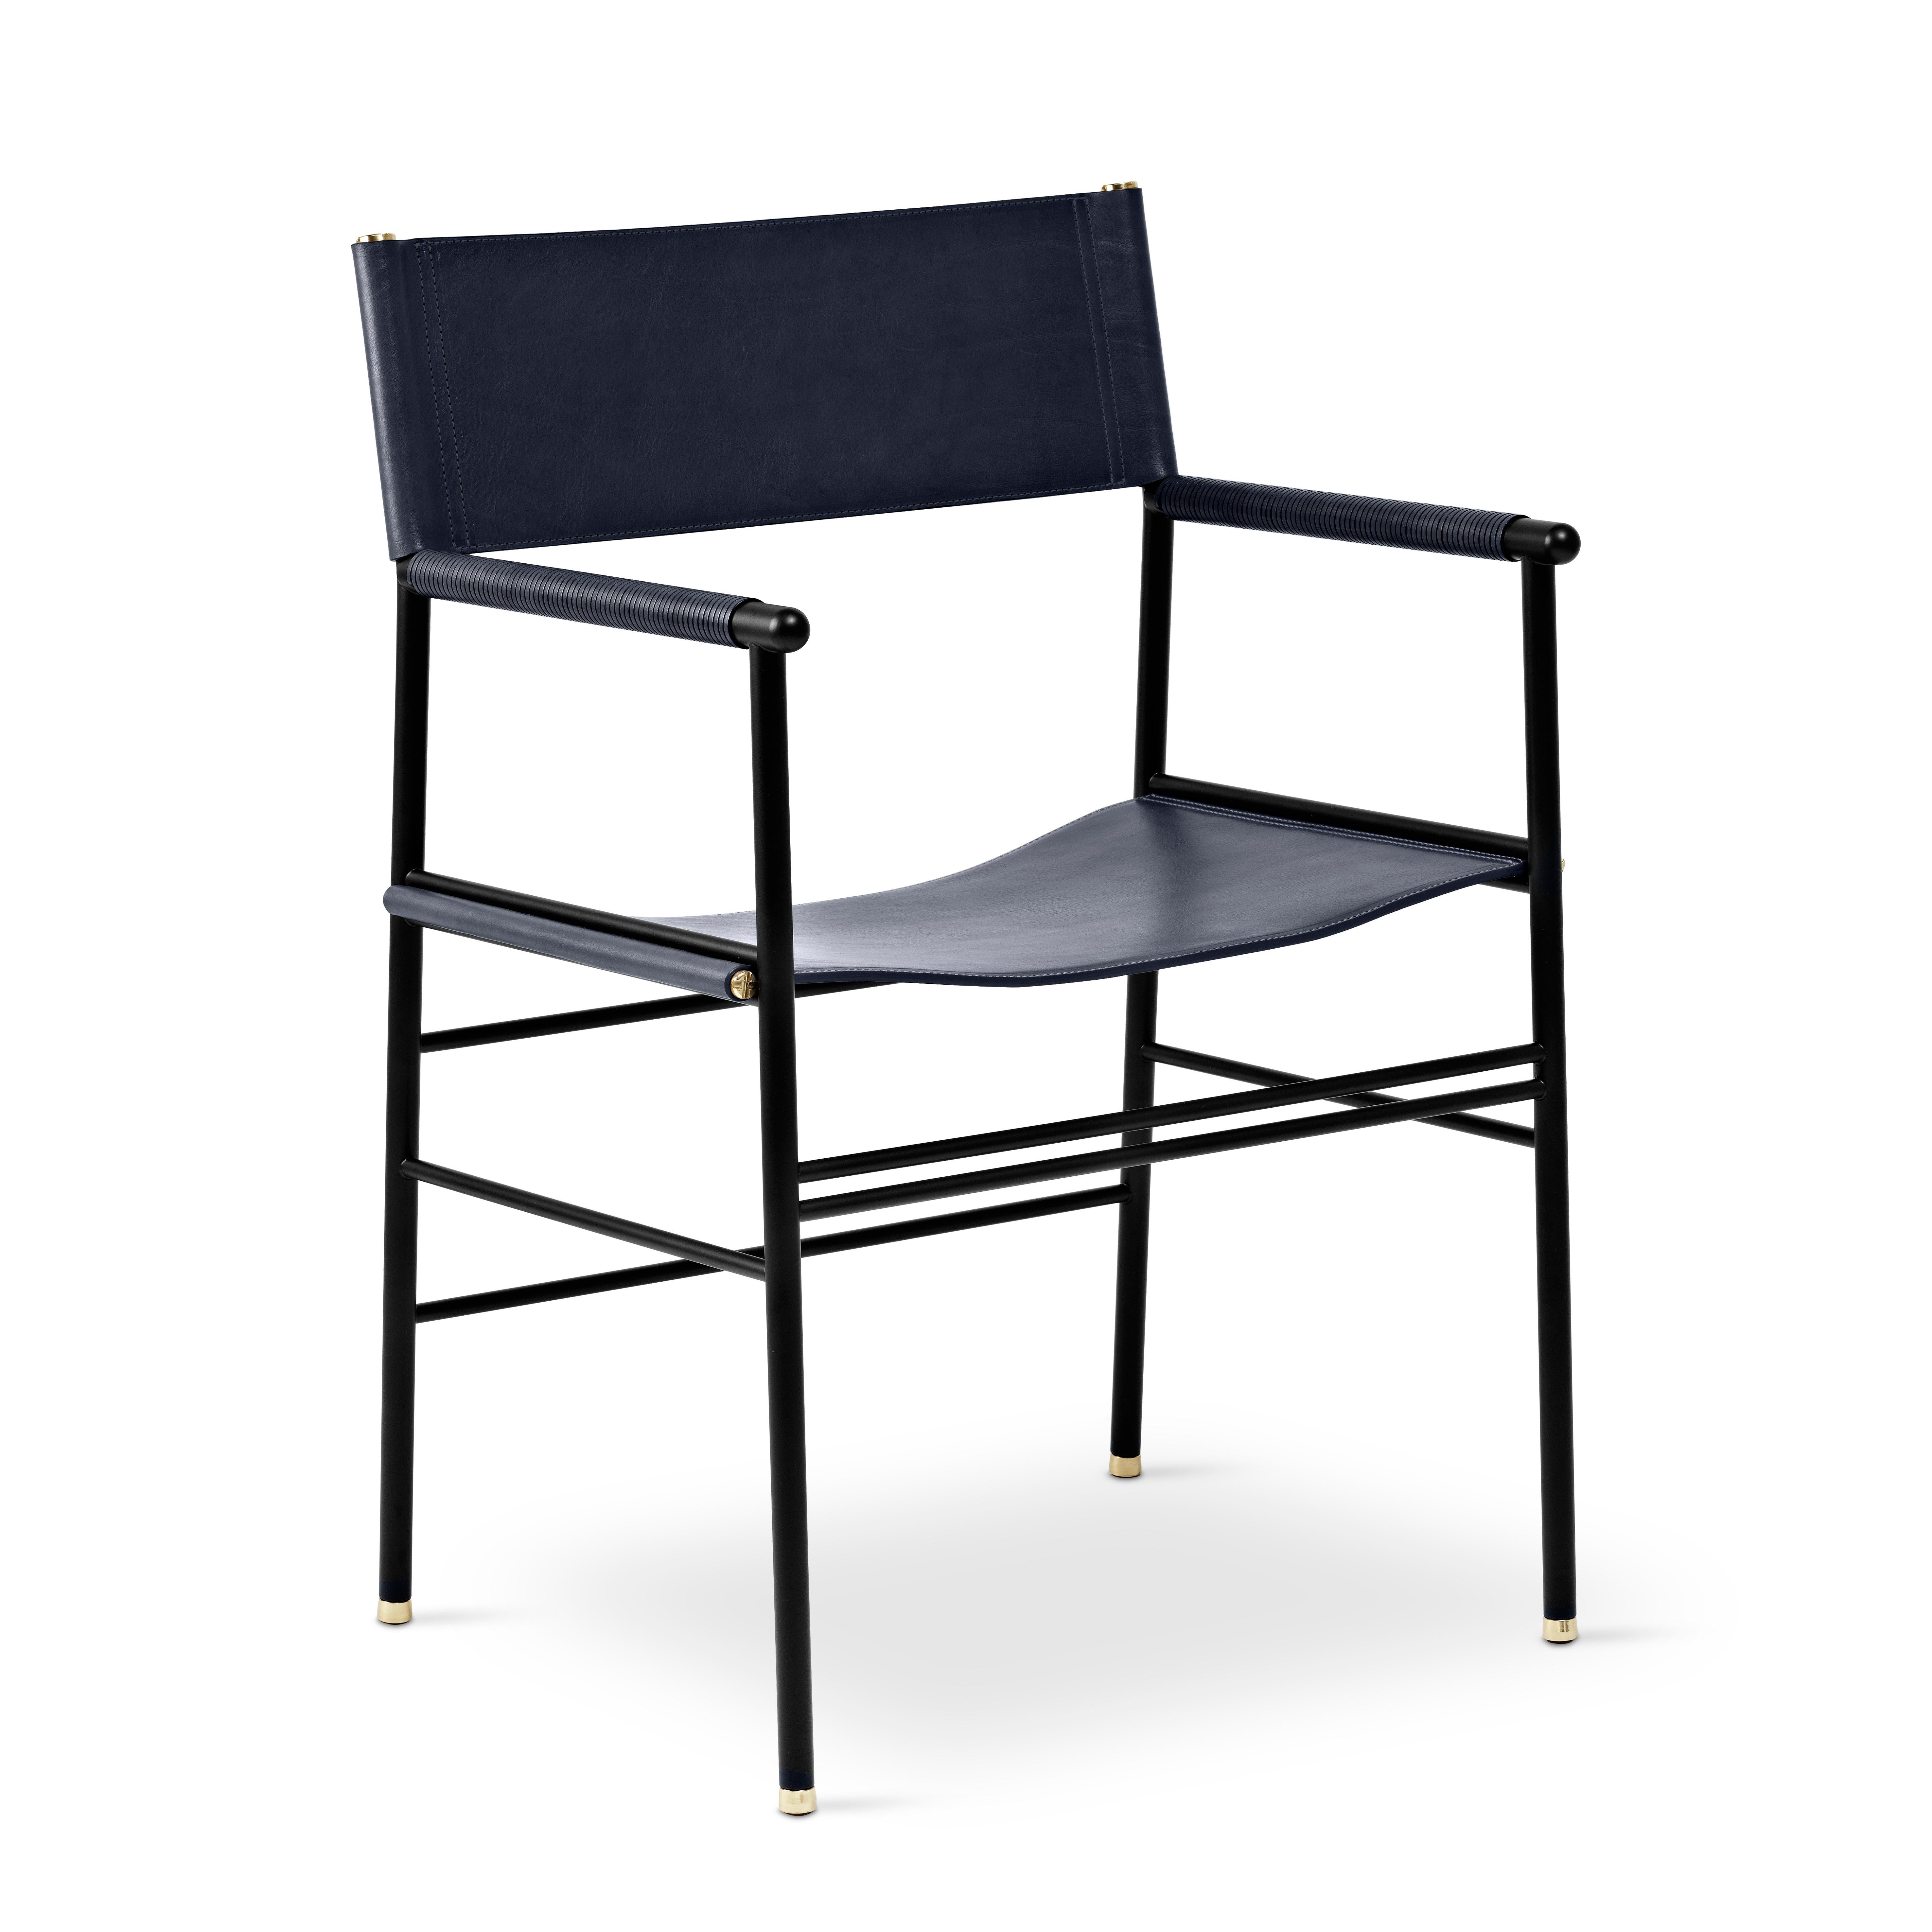 Spanish Set of 5 Timeless Contemporary Chair Navy Blue Leather & Black Rubber Metal For Sale